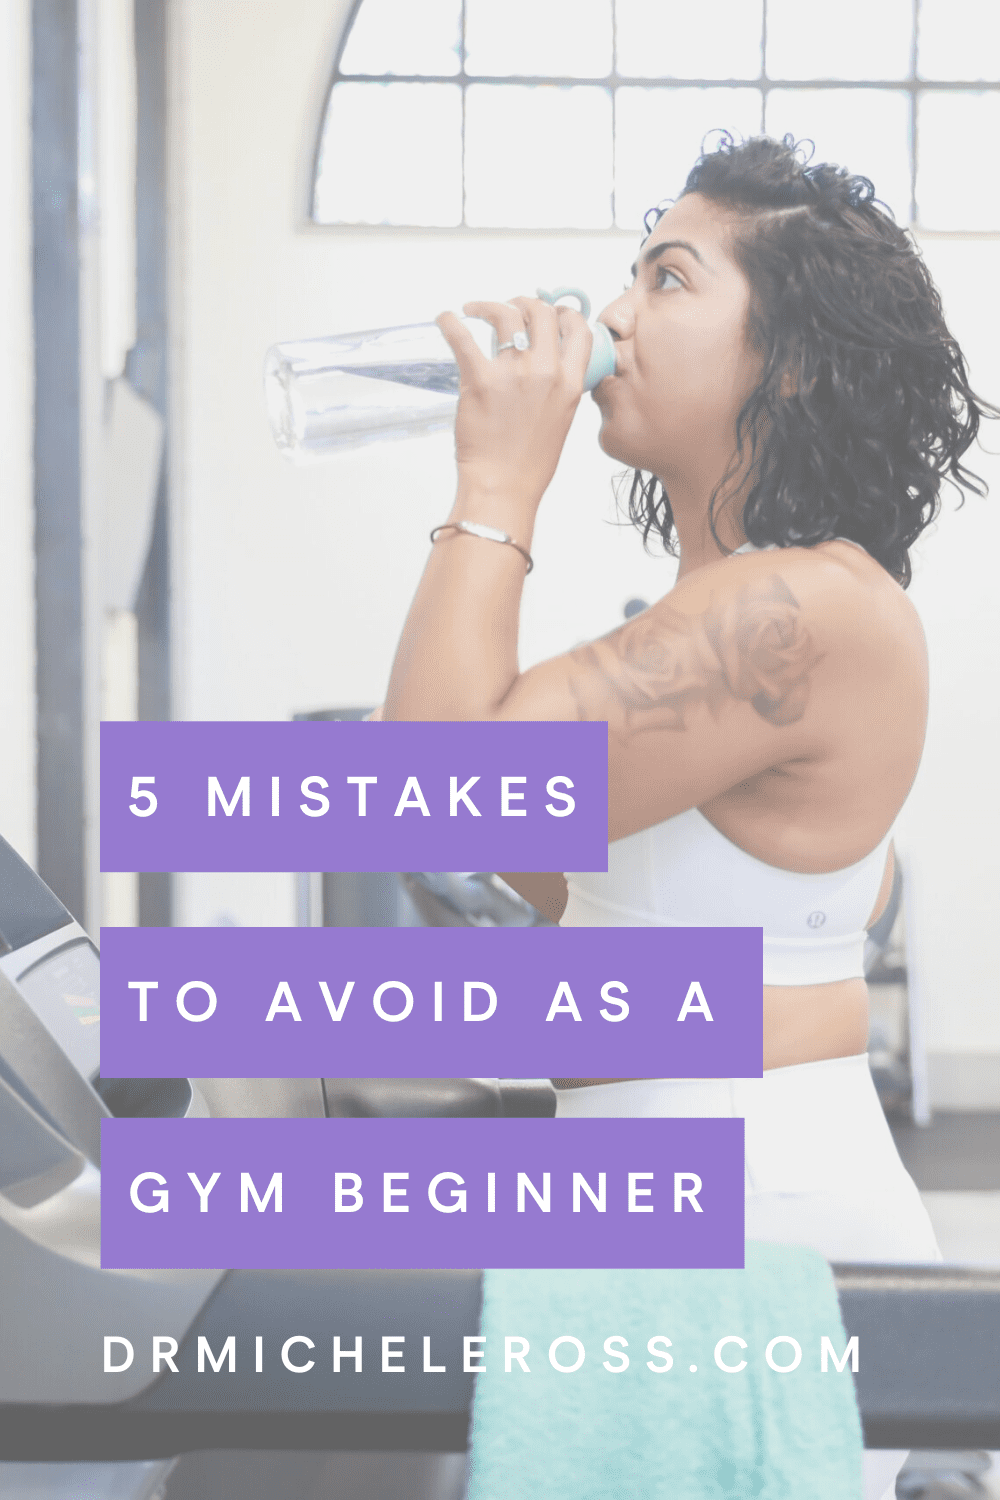 5 Mistakes To Avoid As A Gym Beginner